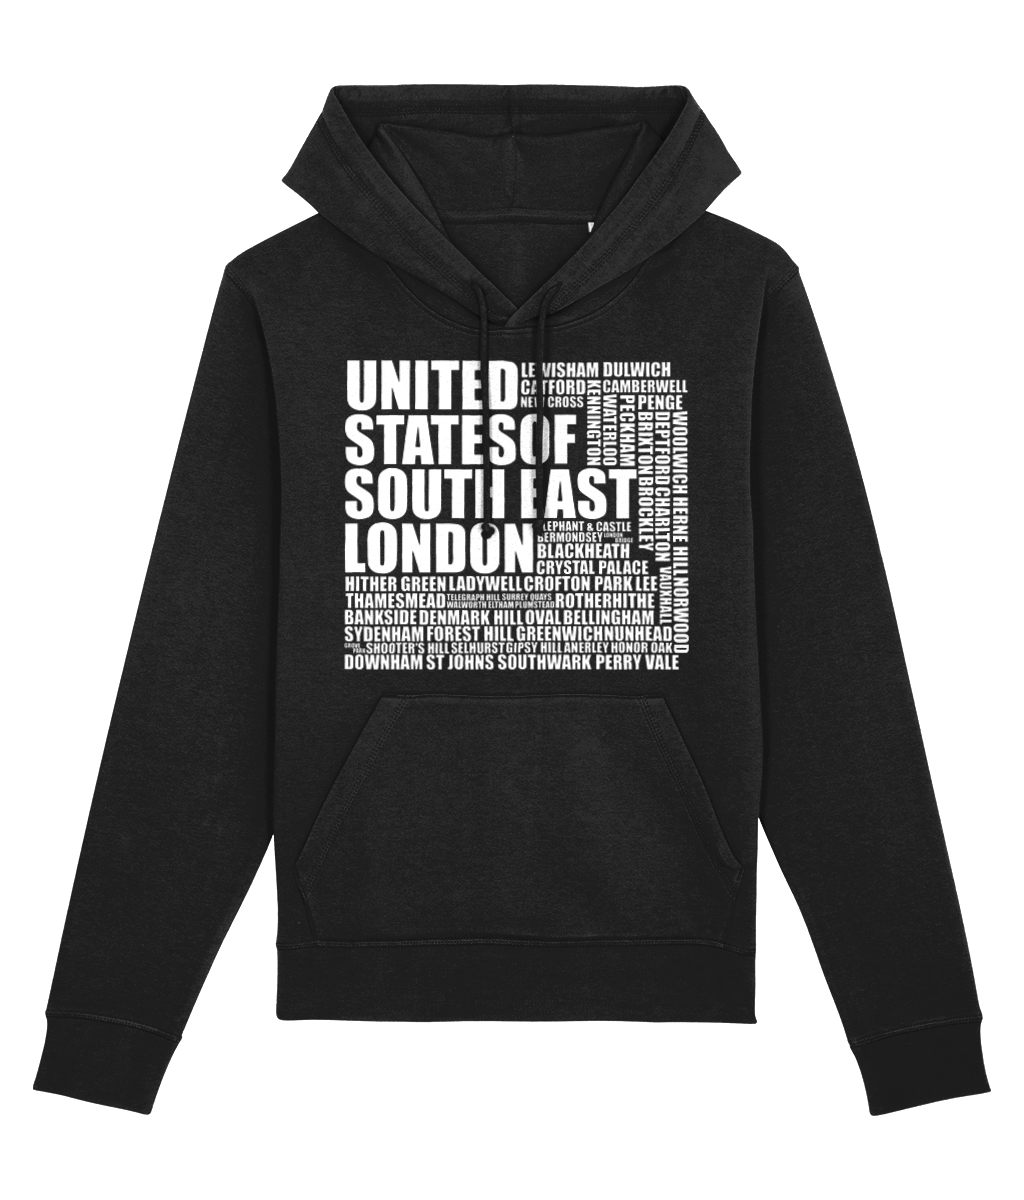 United States of South East London Hoodie